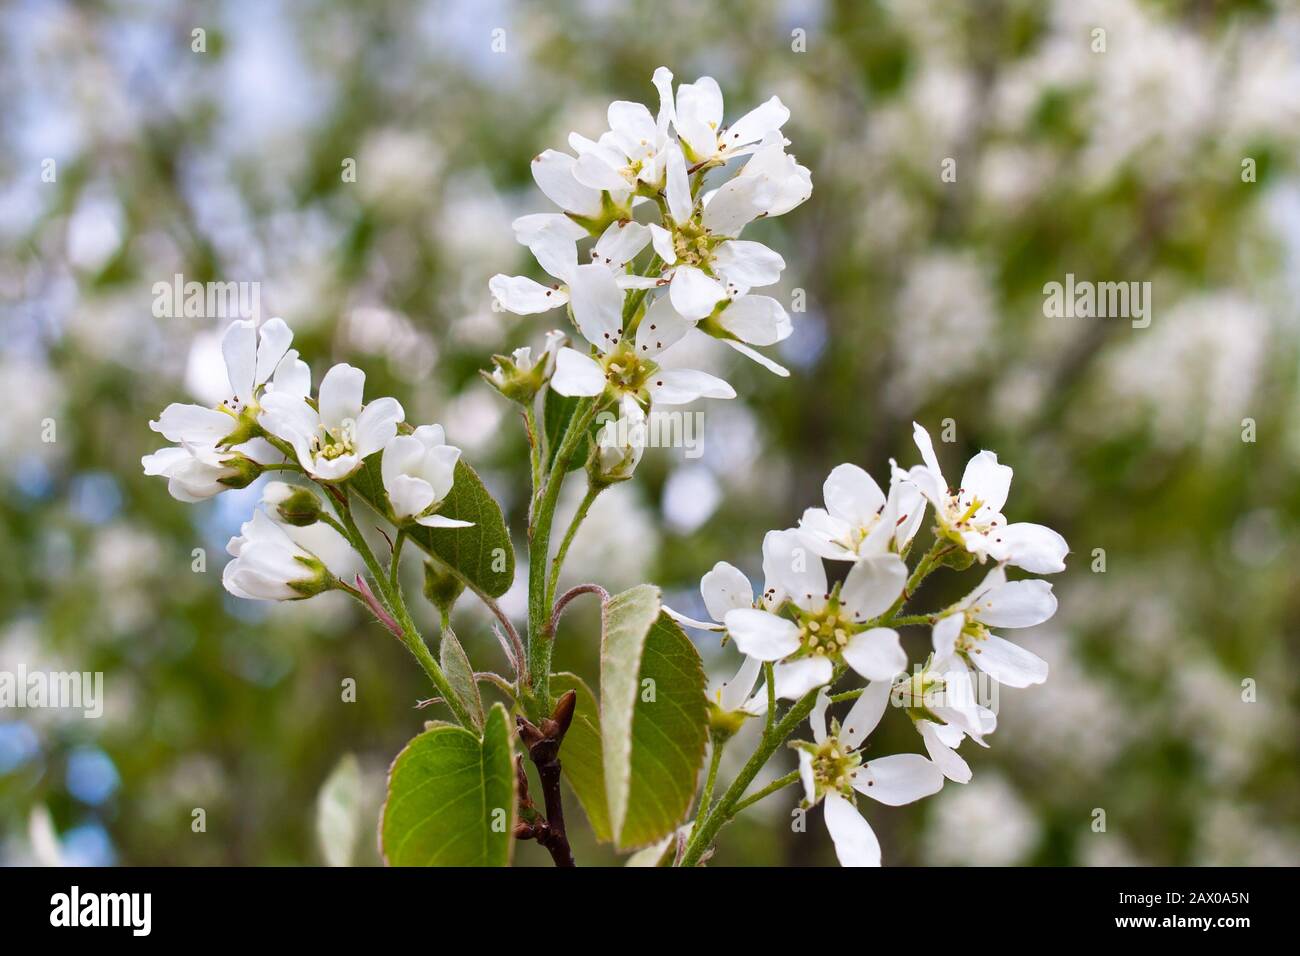 Flowers of serviceberry in the garden Stock Photo